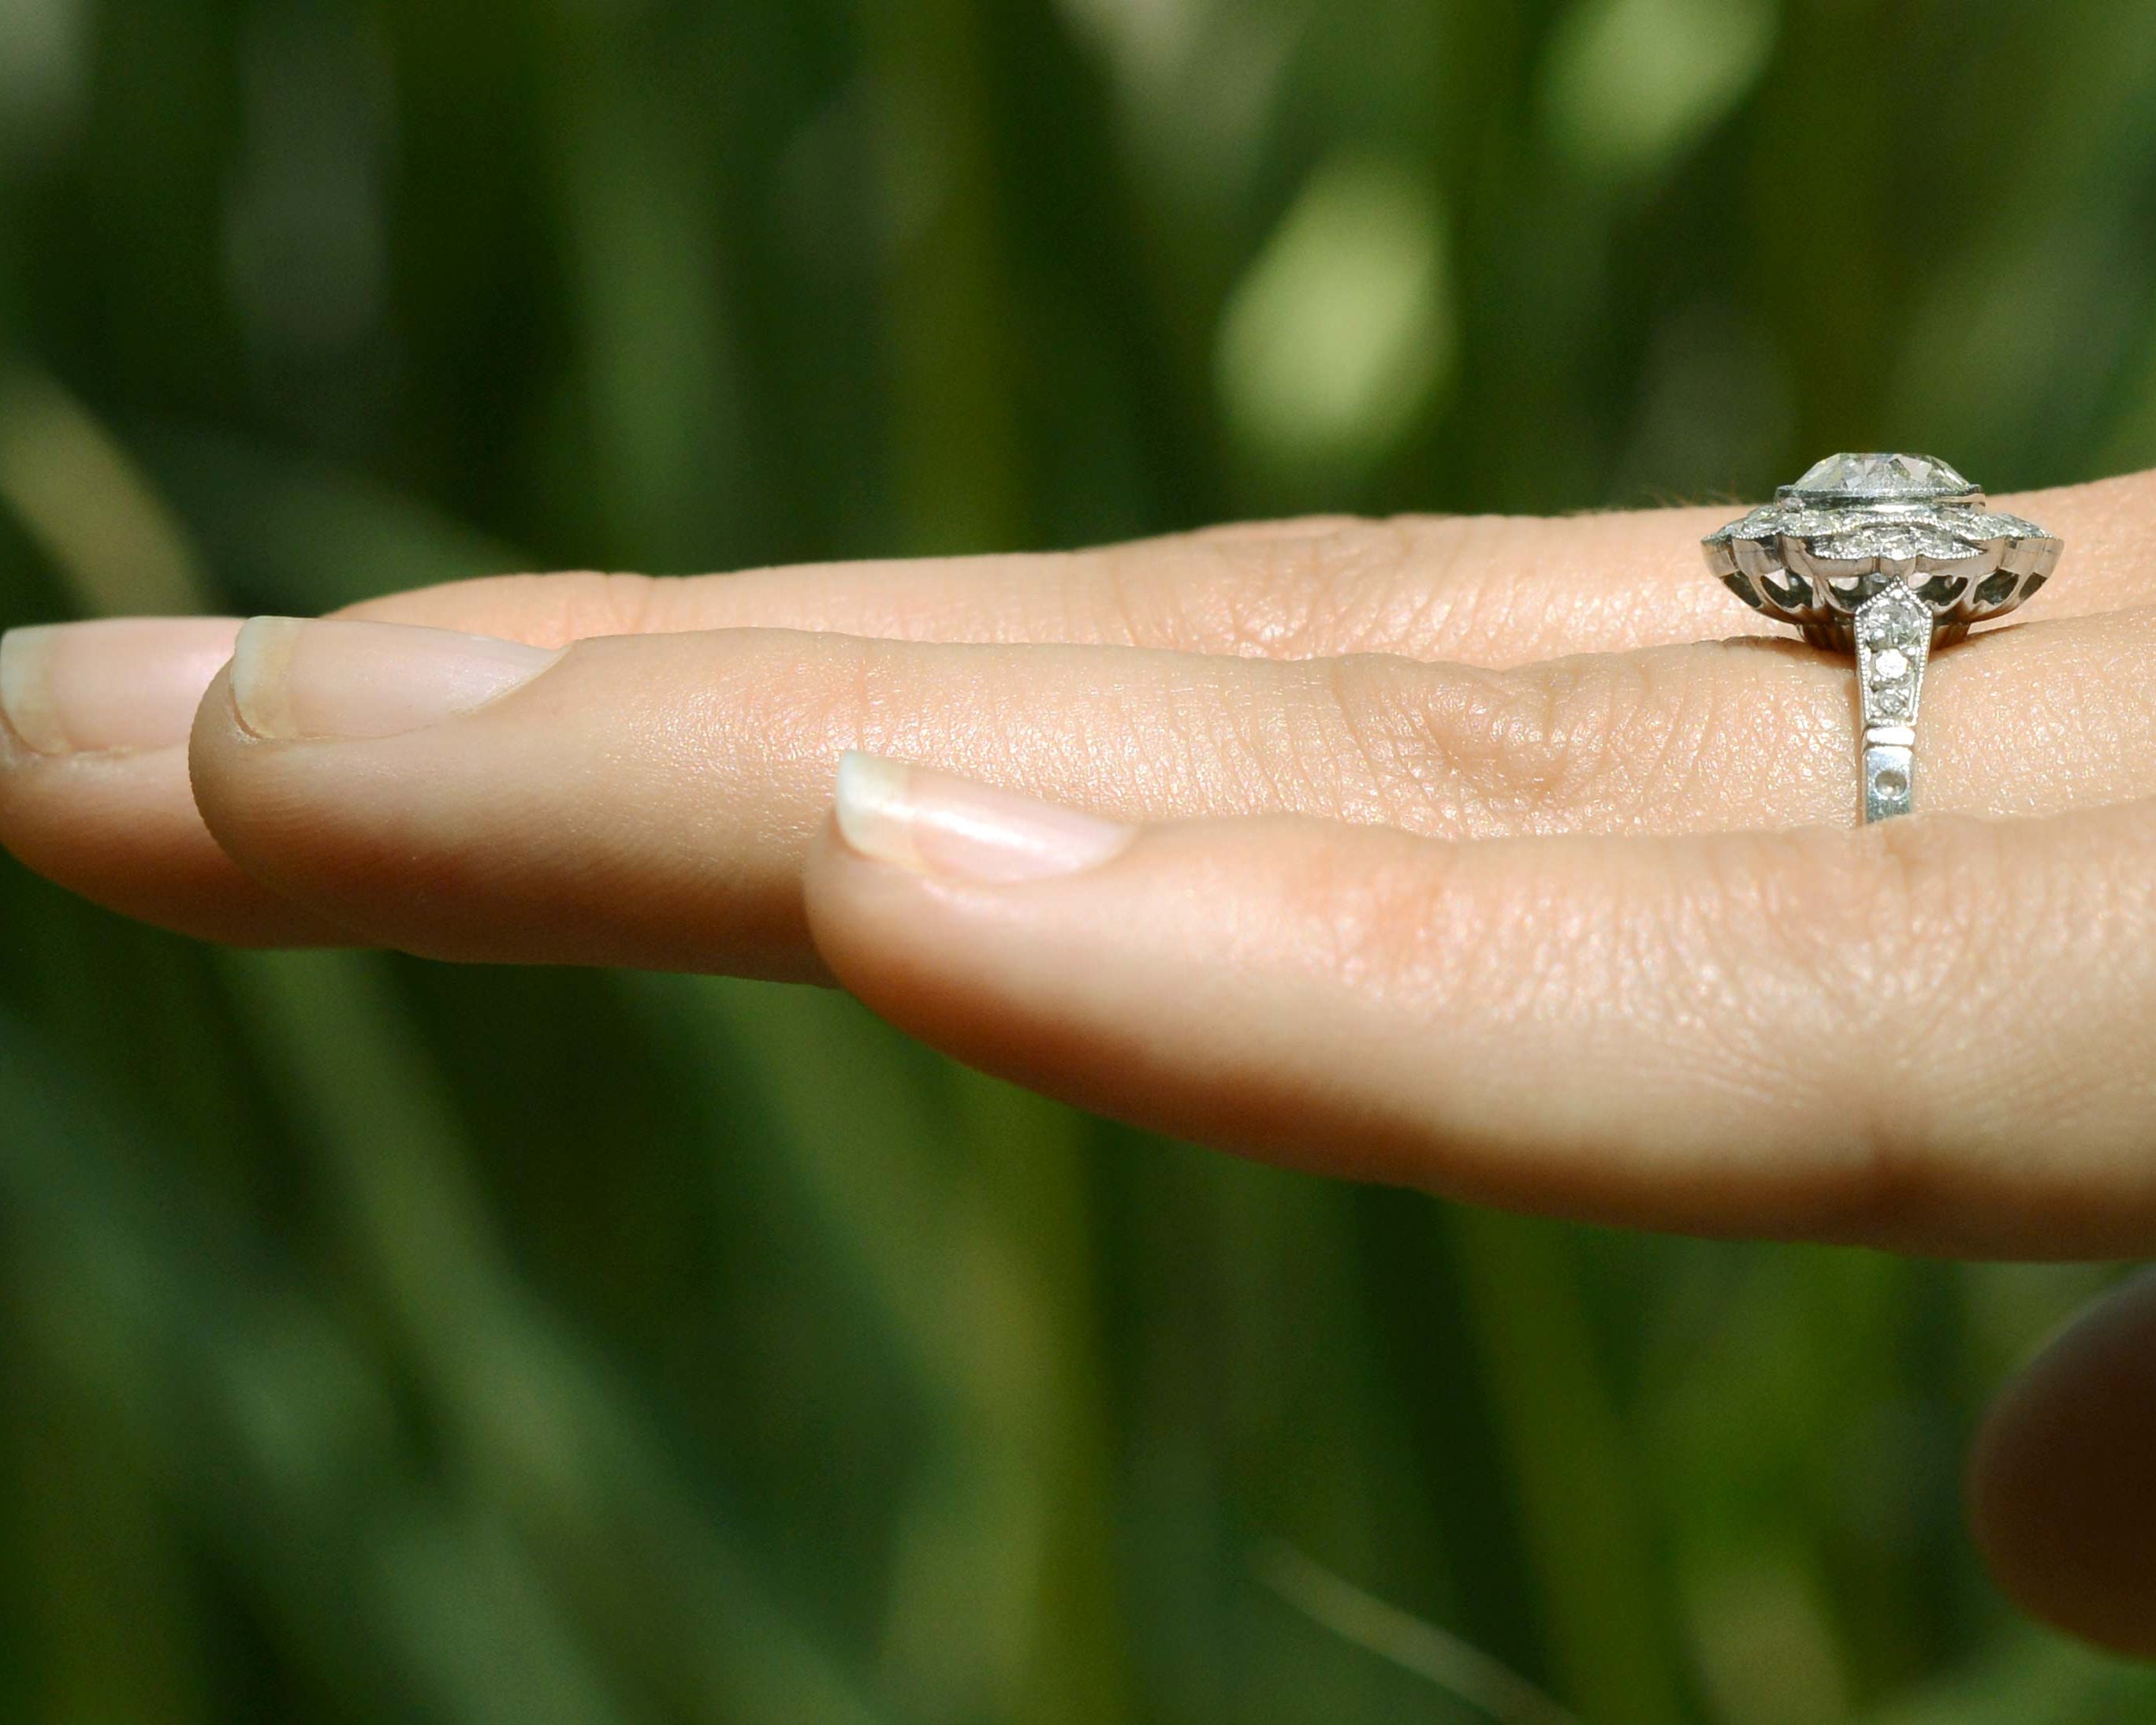 This engagement ring has diamonds on the band.